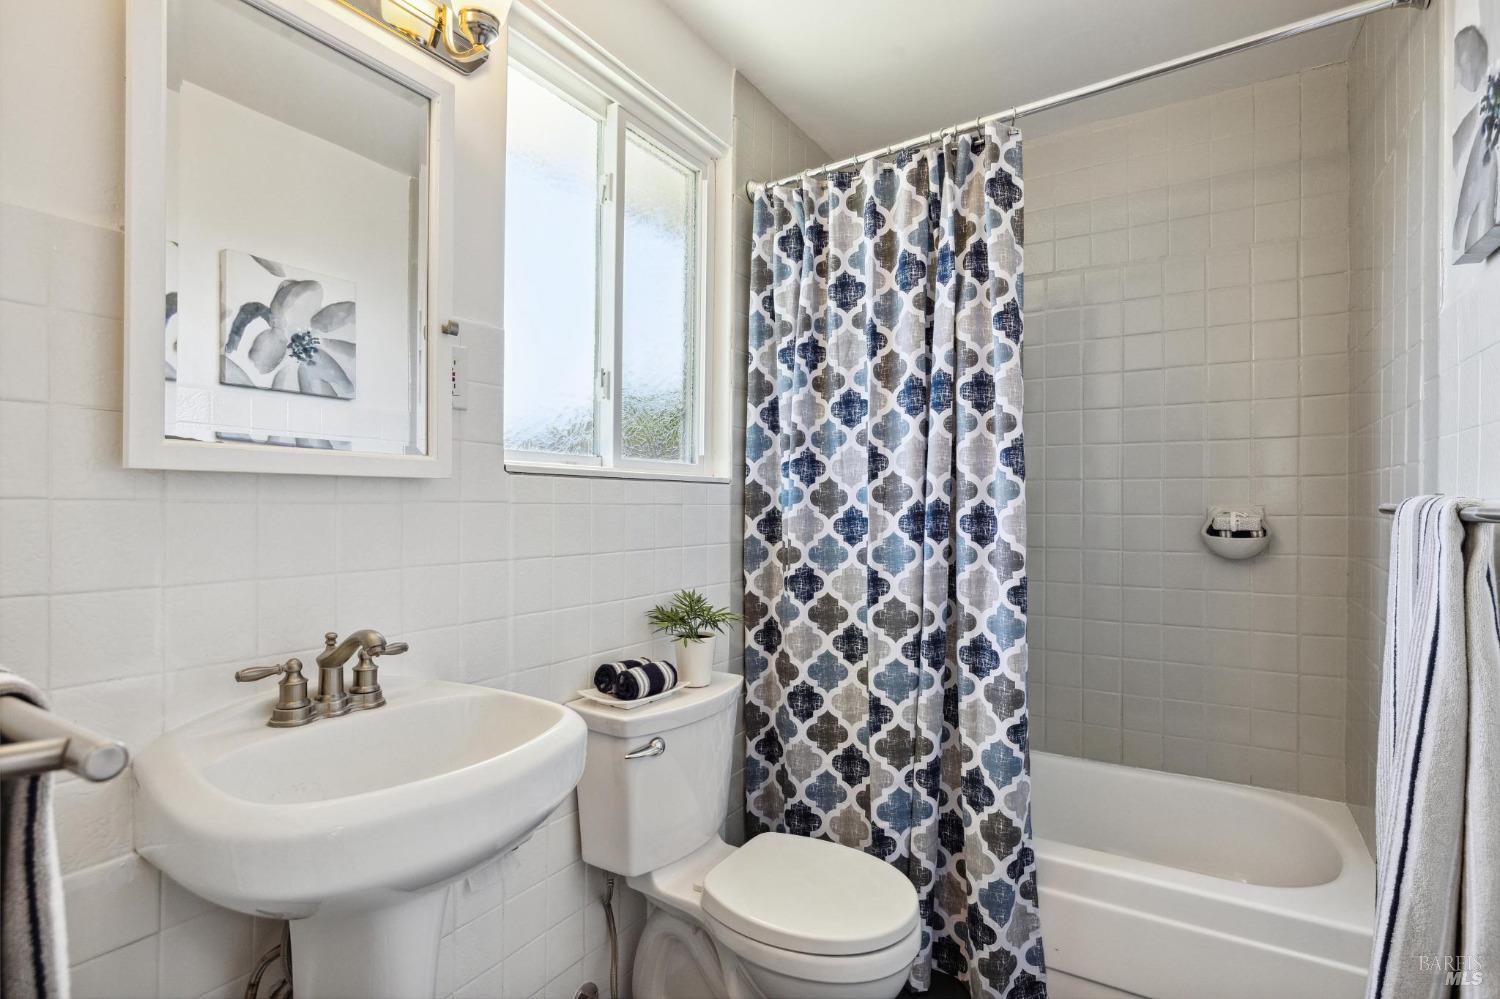 799 Bamboo Terrace, San Rafael, California, 94903, United States, 4 Bedrooms Bedrooms, ,2 BathroomsBathrooms,Residential,For Sale,799 Bamboo Terrace,1499644